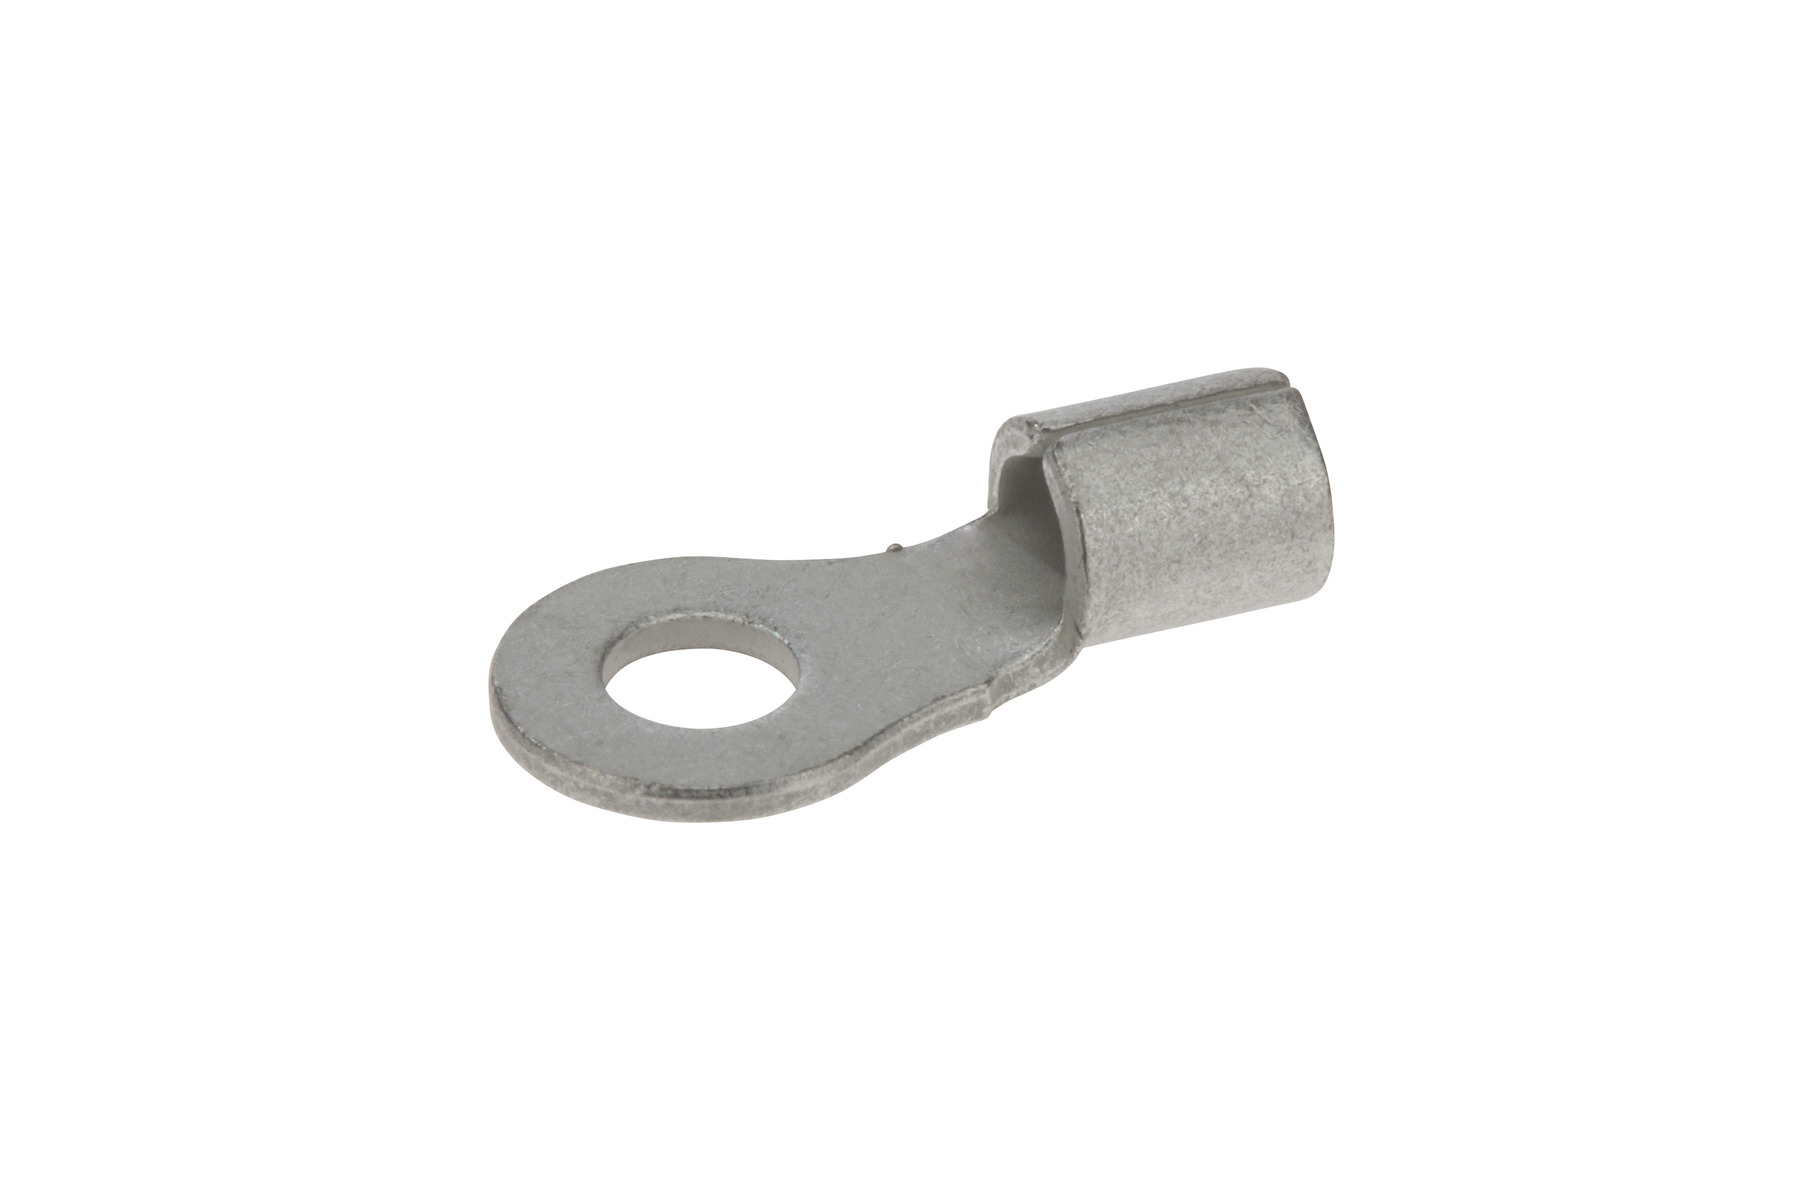 RG5-4LN2 - Stainless Steel Ring Terminals - 12-10 AWG - #8 Stud